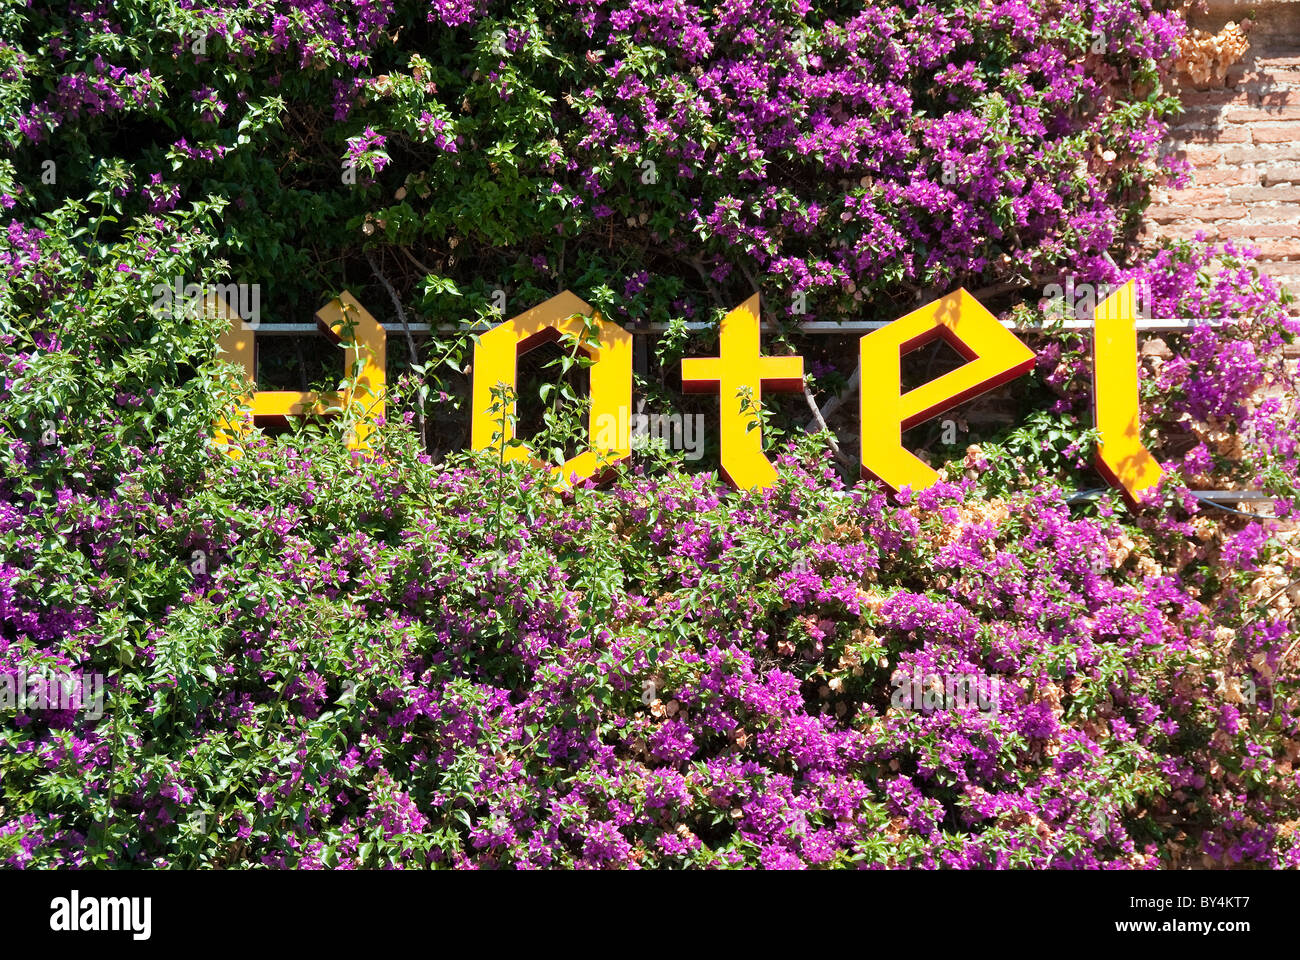 Luxury Hotel sign Livorno surrounded by flowering bougainvillea flowers Stock Photo